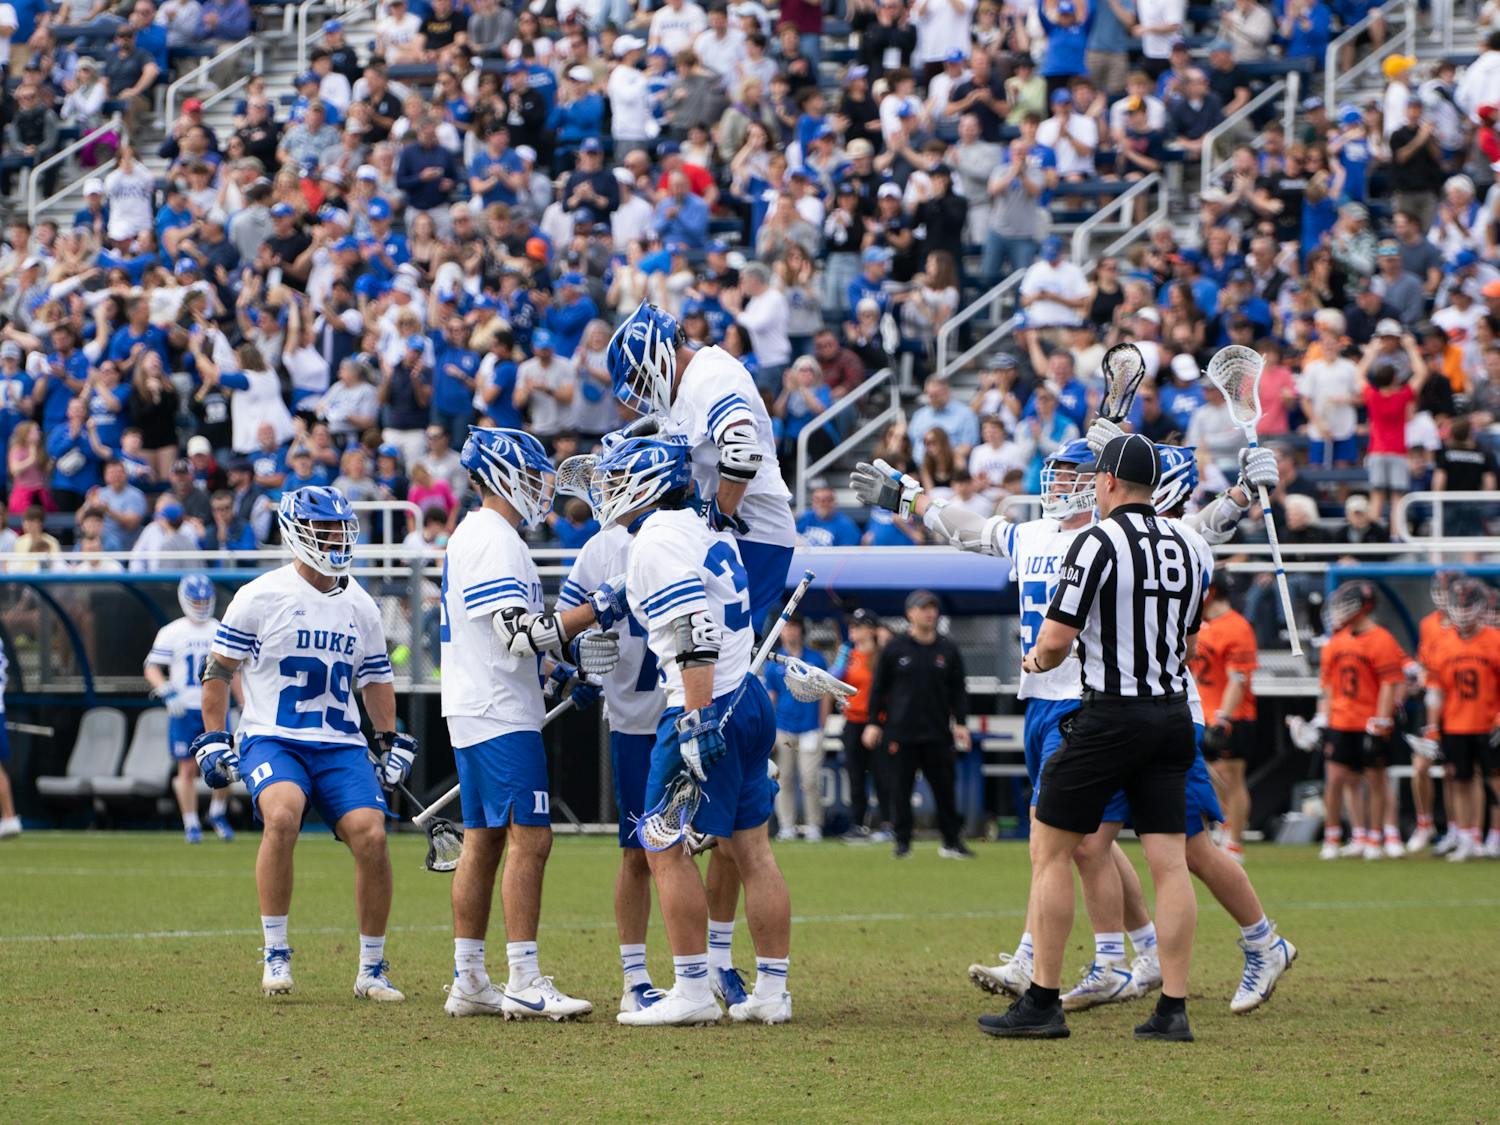 The Blue Devils celebrate one of their many goals during Sunday's demolition of Princeton.